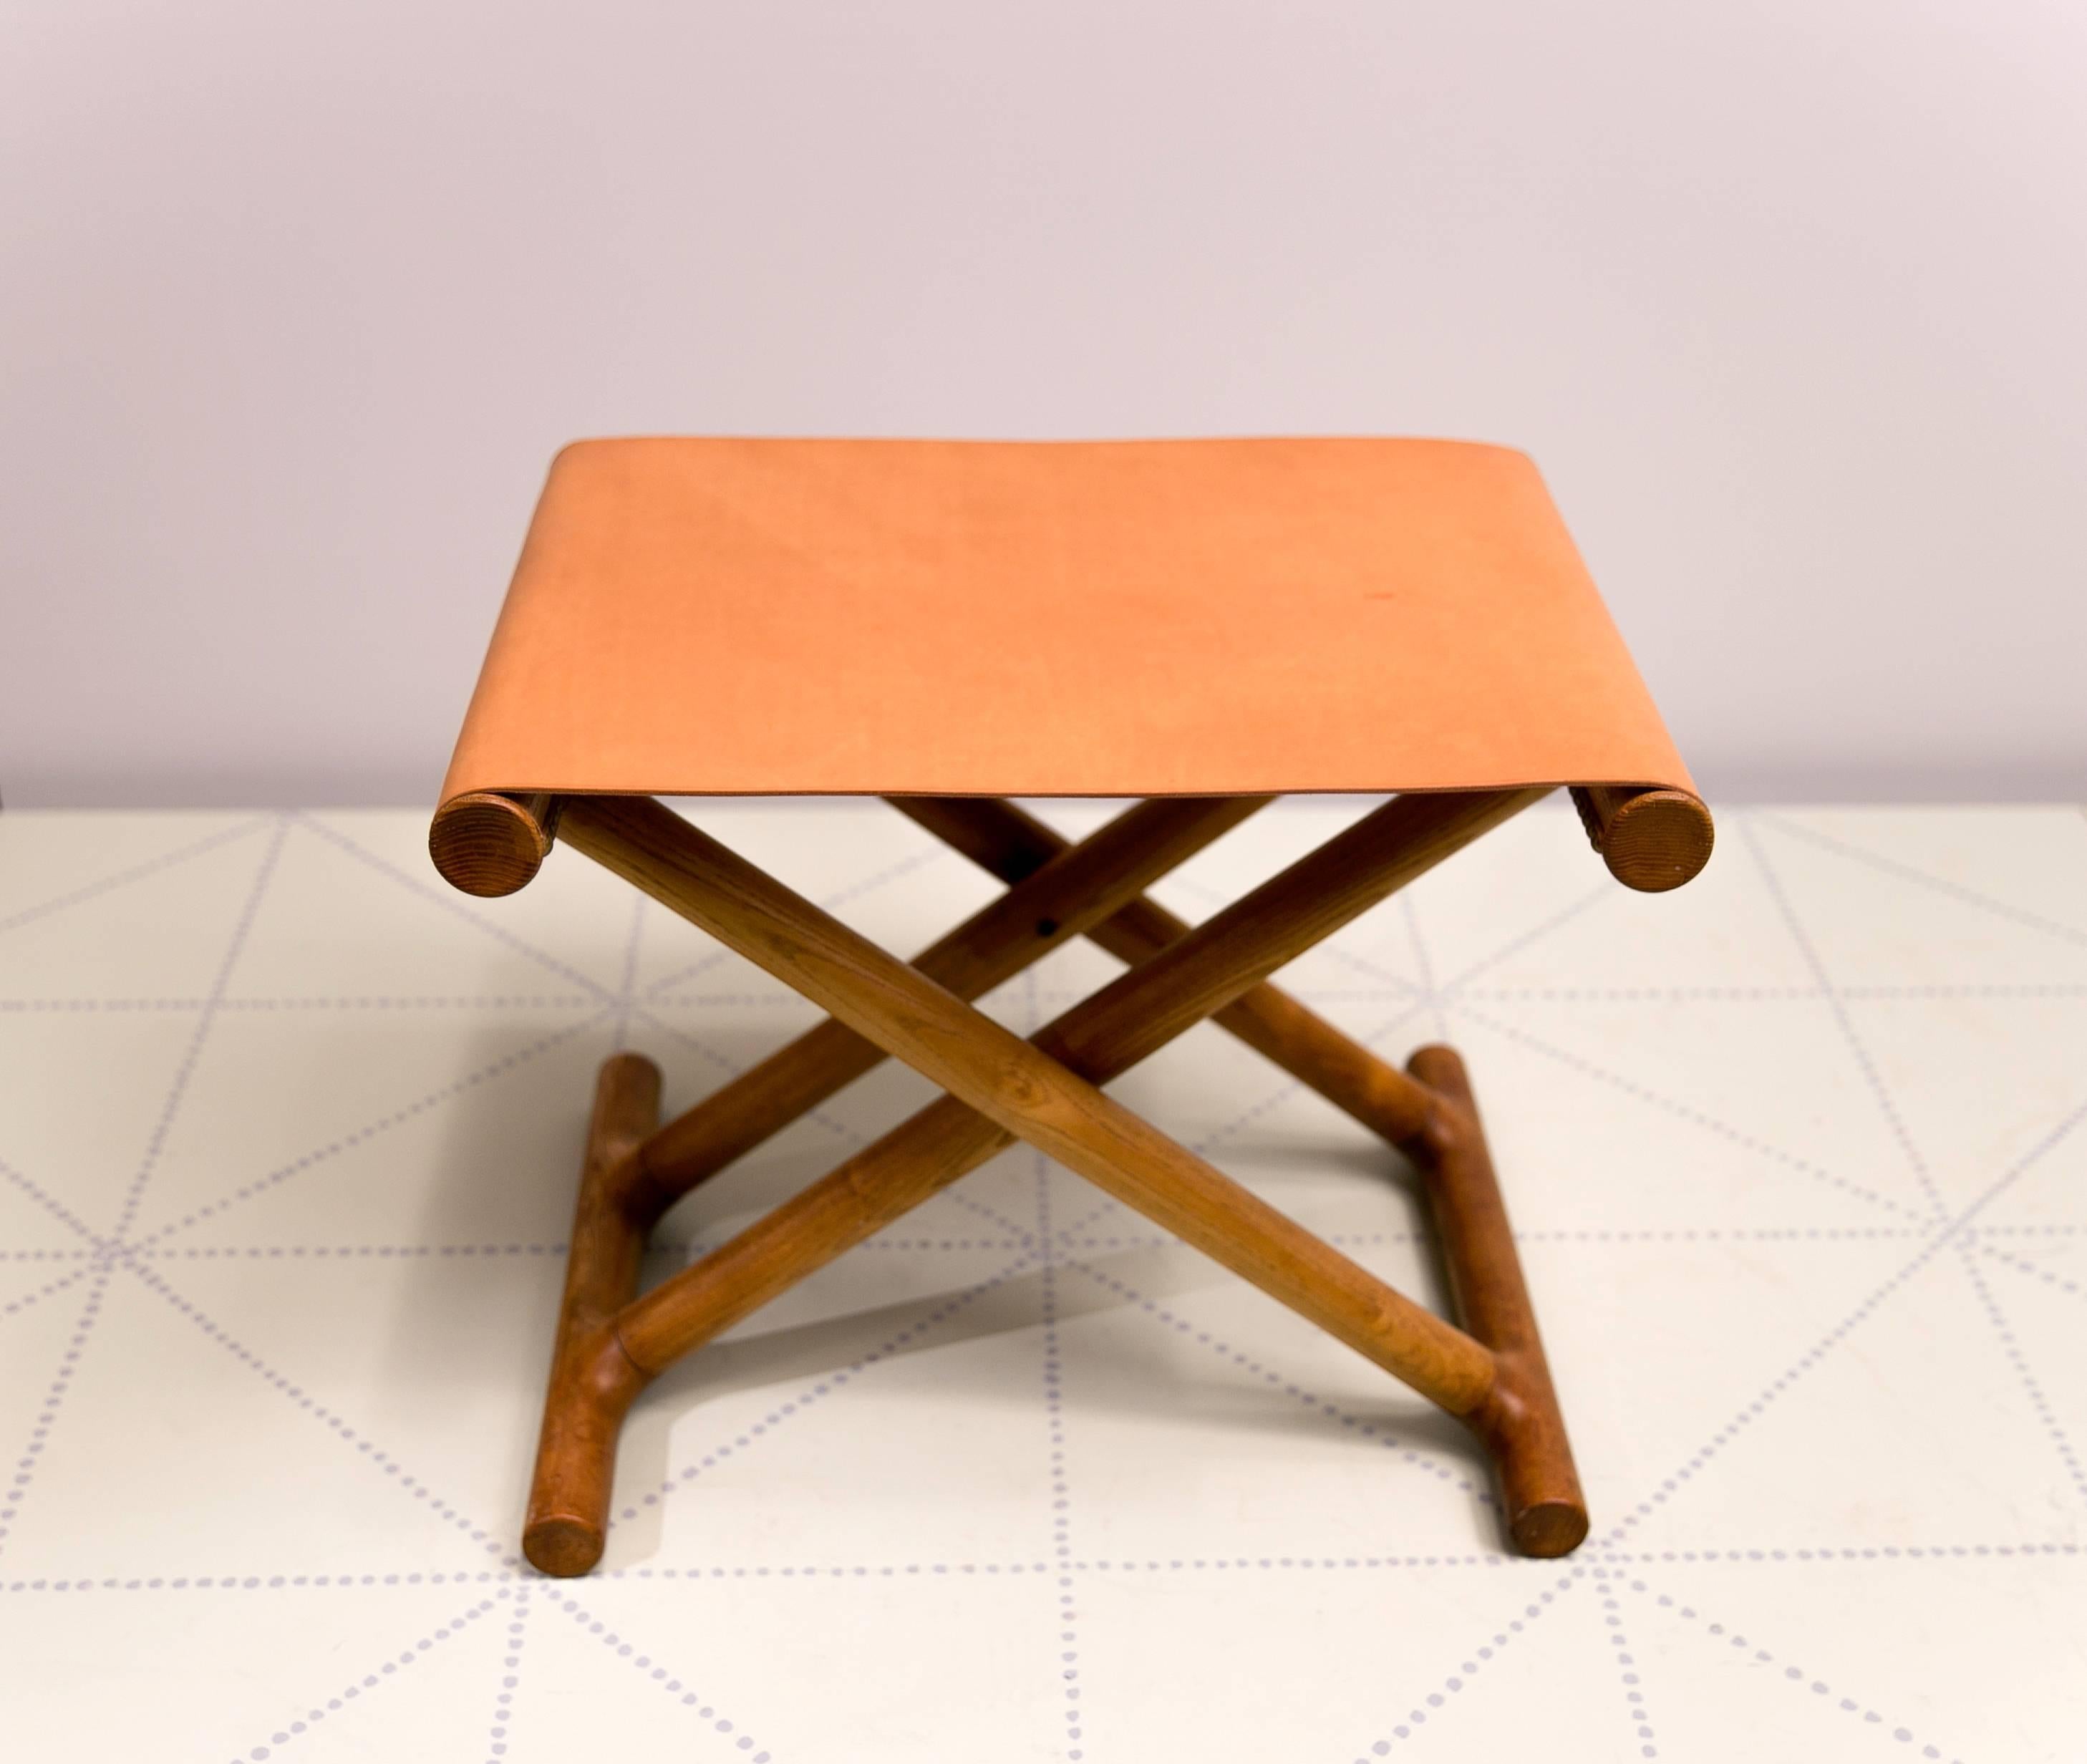 Mogens Lassen's, 1946 Egyptian Folding Stool in Ash and Natural Leather. Presented in 1946 at the Copenhagen cabinetmakers’ Guild Exhibition on the stand of cabinetmaker Jørgen Wolff’s Møbelsnedkeri, this exquisite stool is possibly unique. It fits